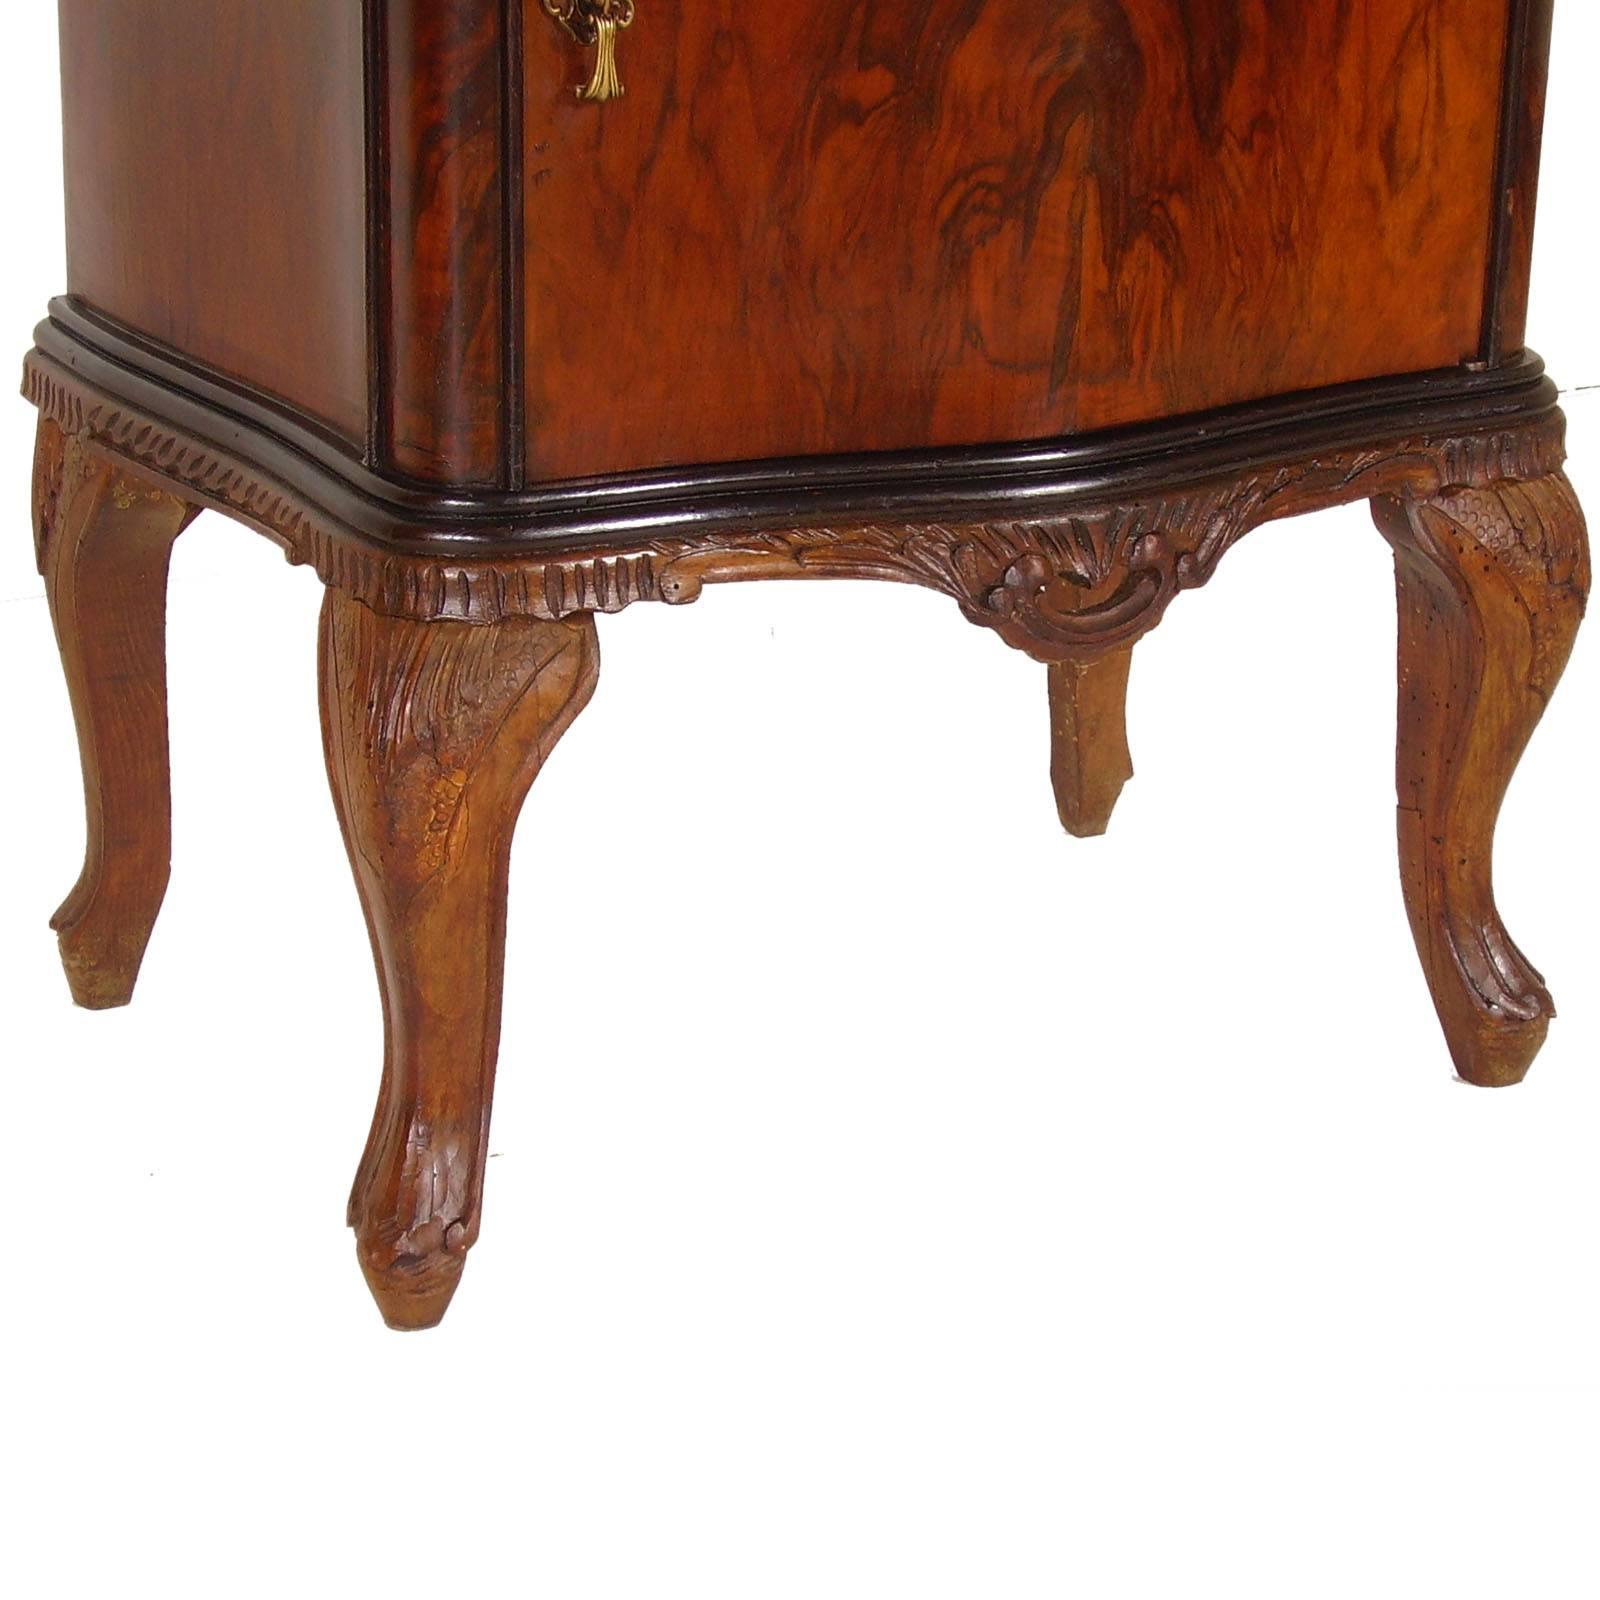 Venetian early 20th century baroque Chippendale nightstand bedside table in hand-carved walnut, burl walnut, restored and finished to wax. With decorated top in black crystal.

Measures cm: H 64, W 56, D 38.